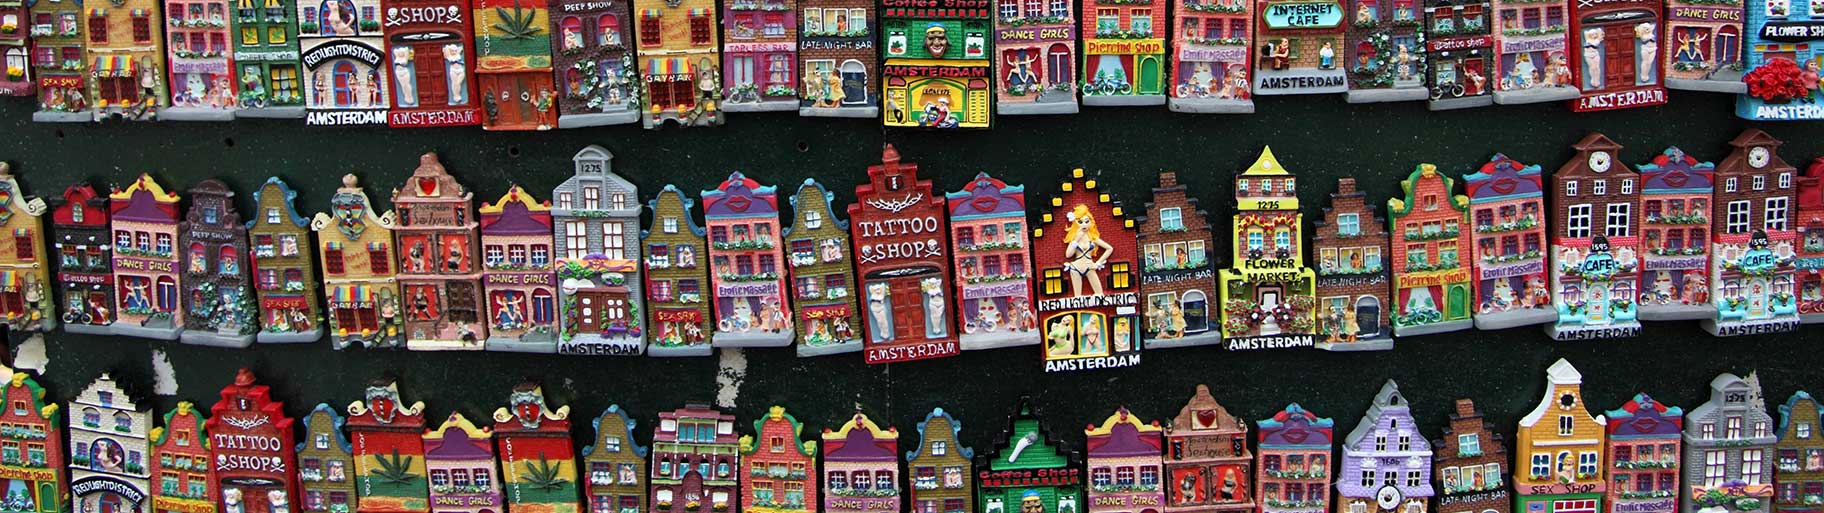 Three rows of ceramic magnets of Amsterdam houses